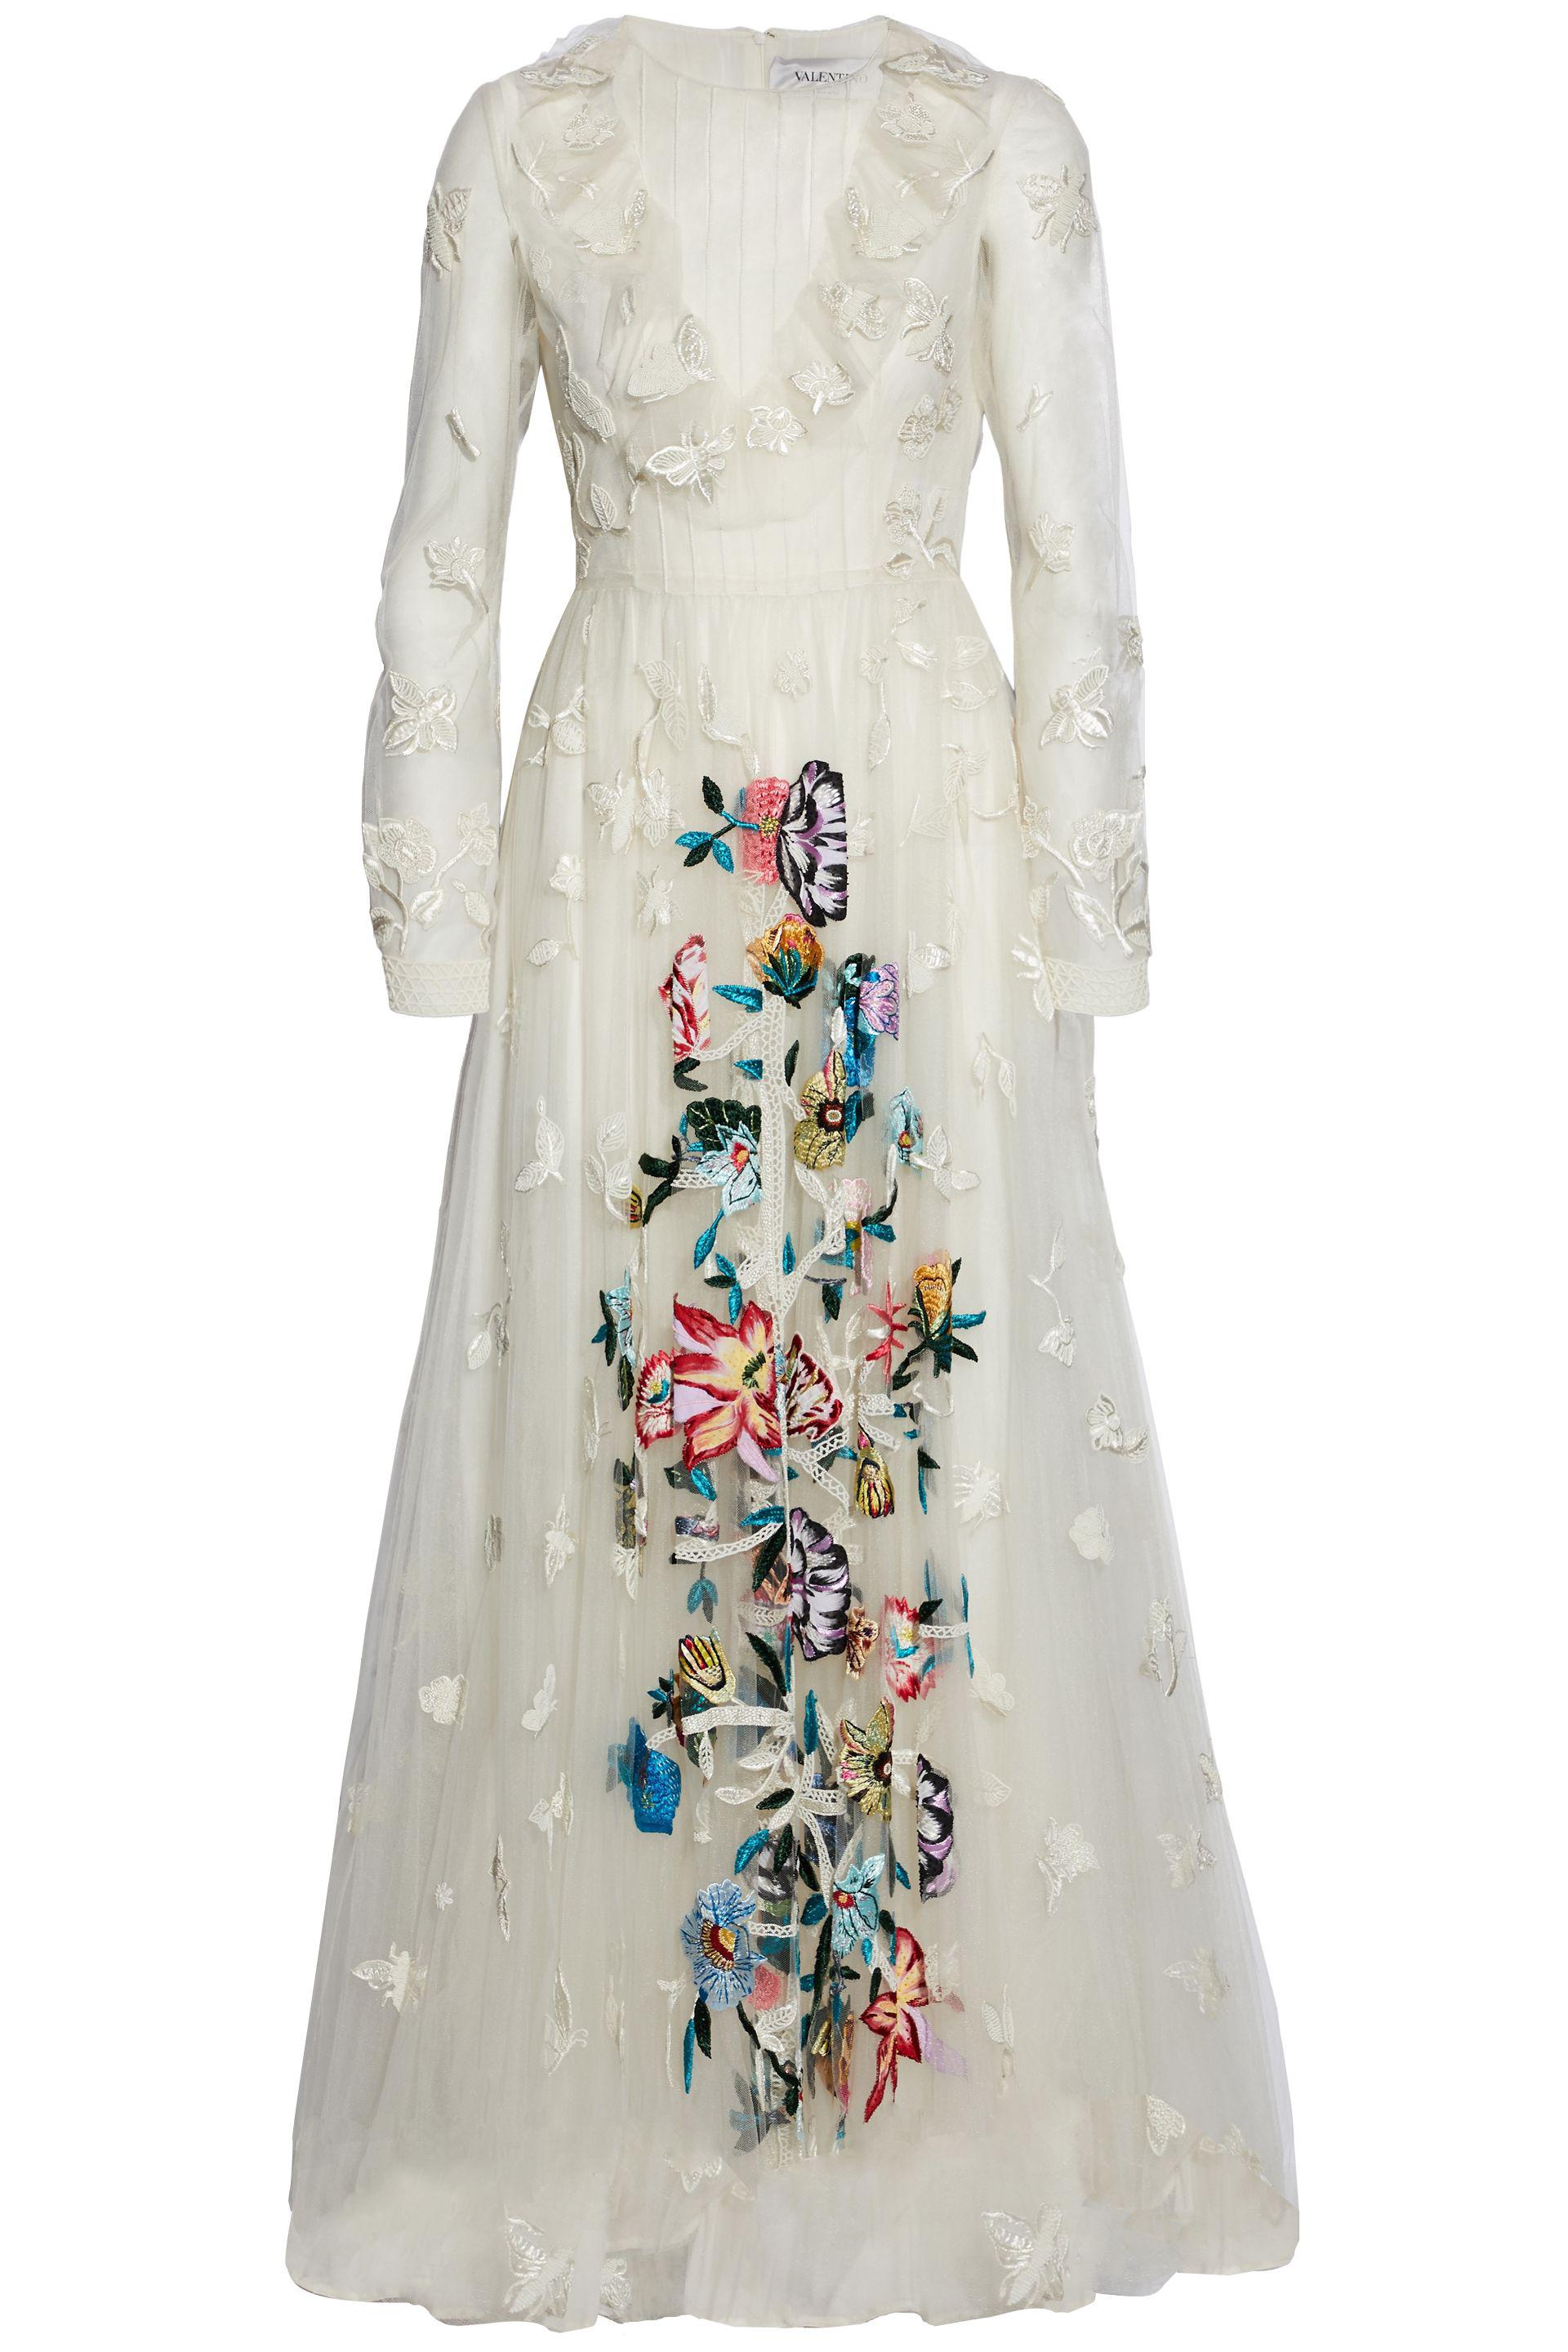 Valentino Beaded Embroidered Tulle Gown in White | Lyst